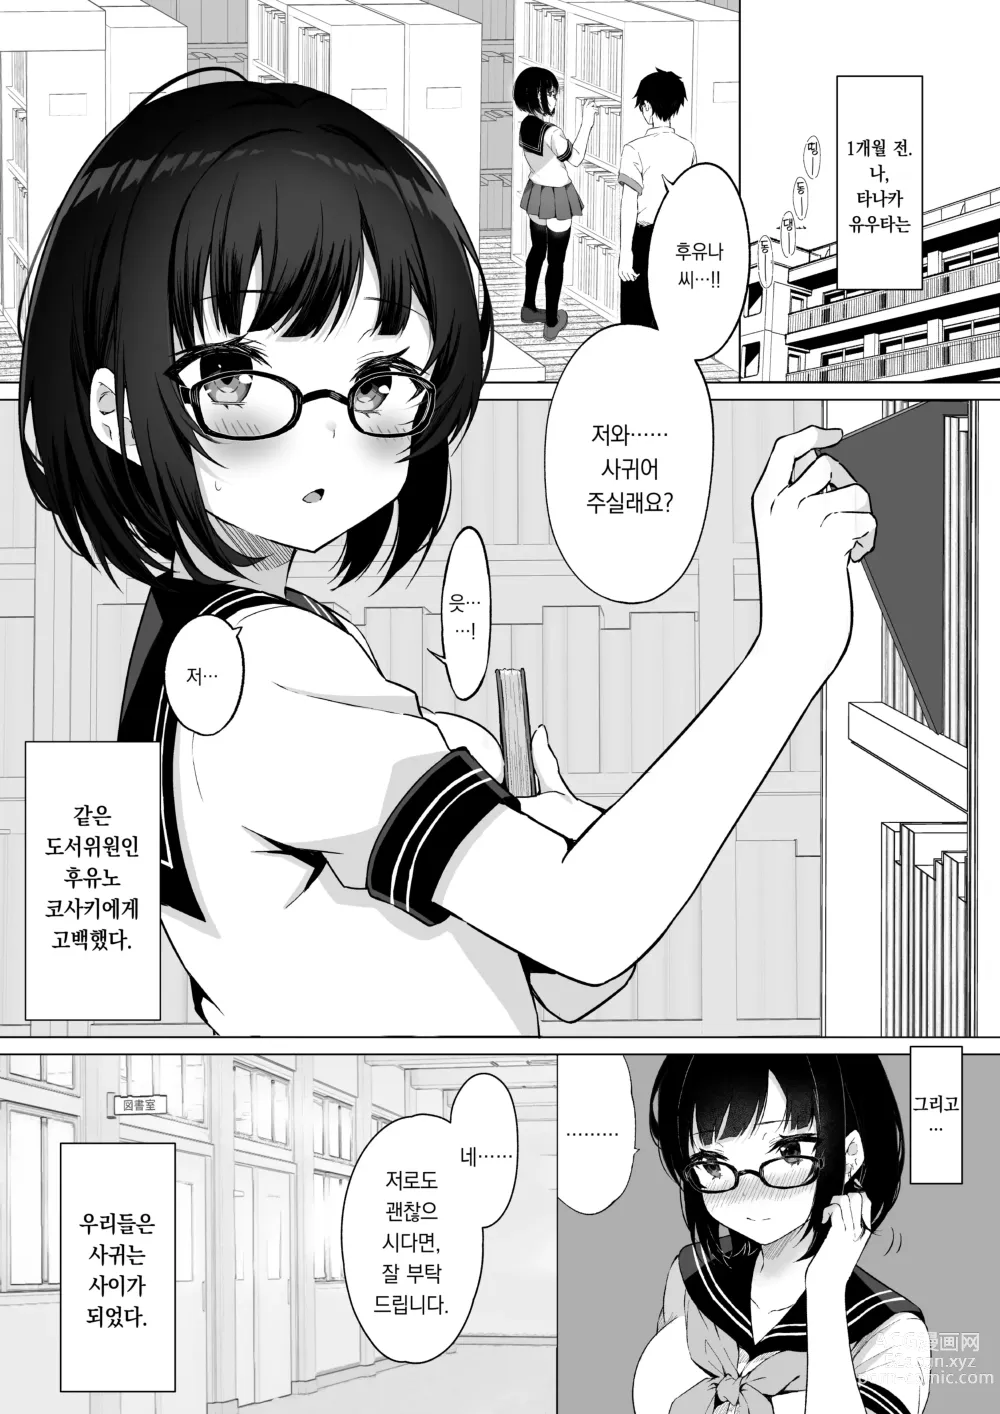 Page 2 of doujinshi 타락한 여자친구